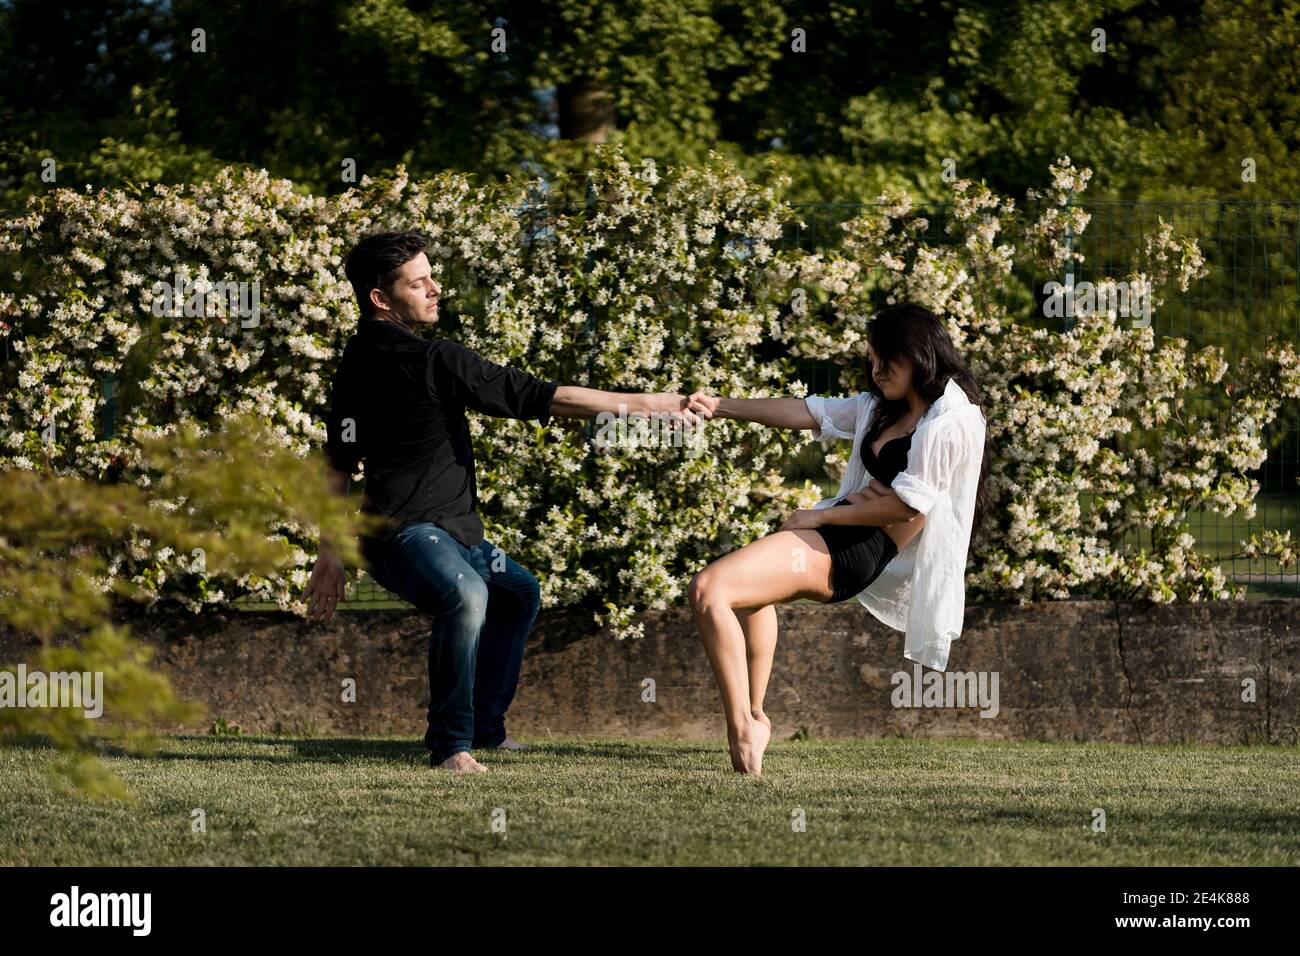 Heterosexual couple dancing while holding hand over grass in back yard Stock Photo